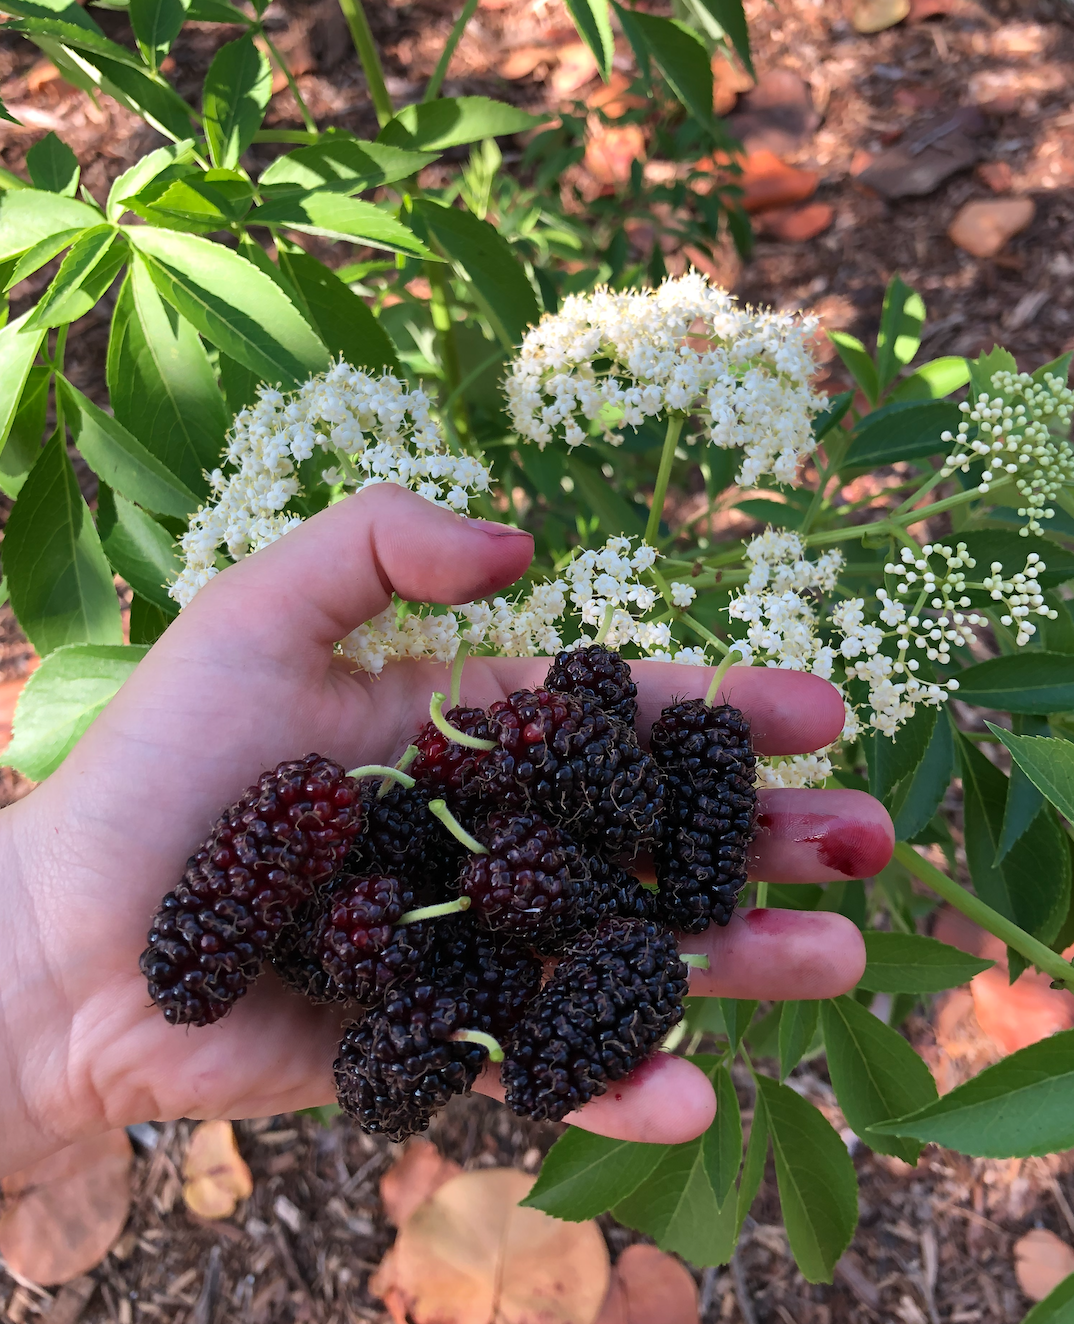 Mulberries are in season at New College!